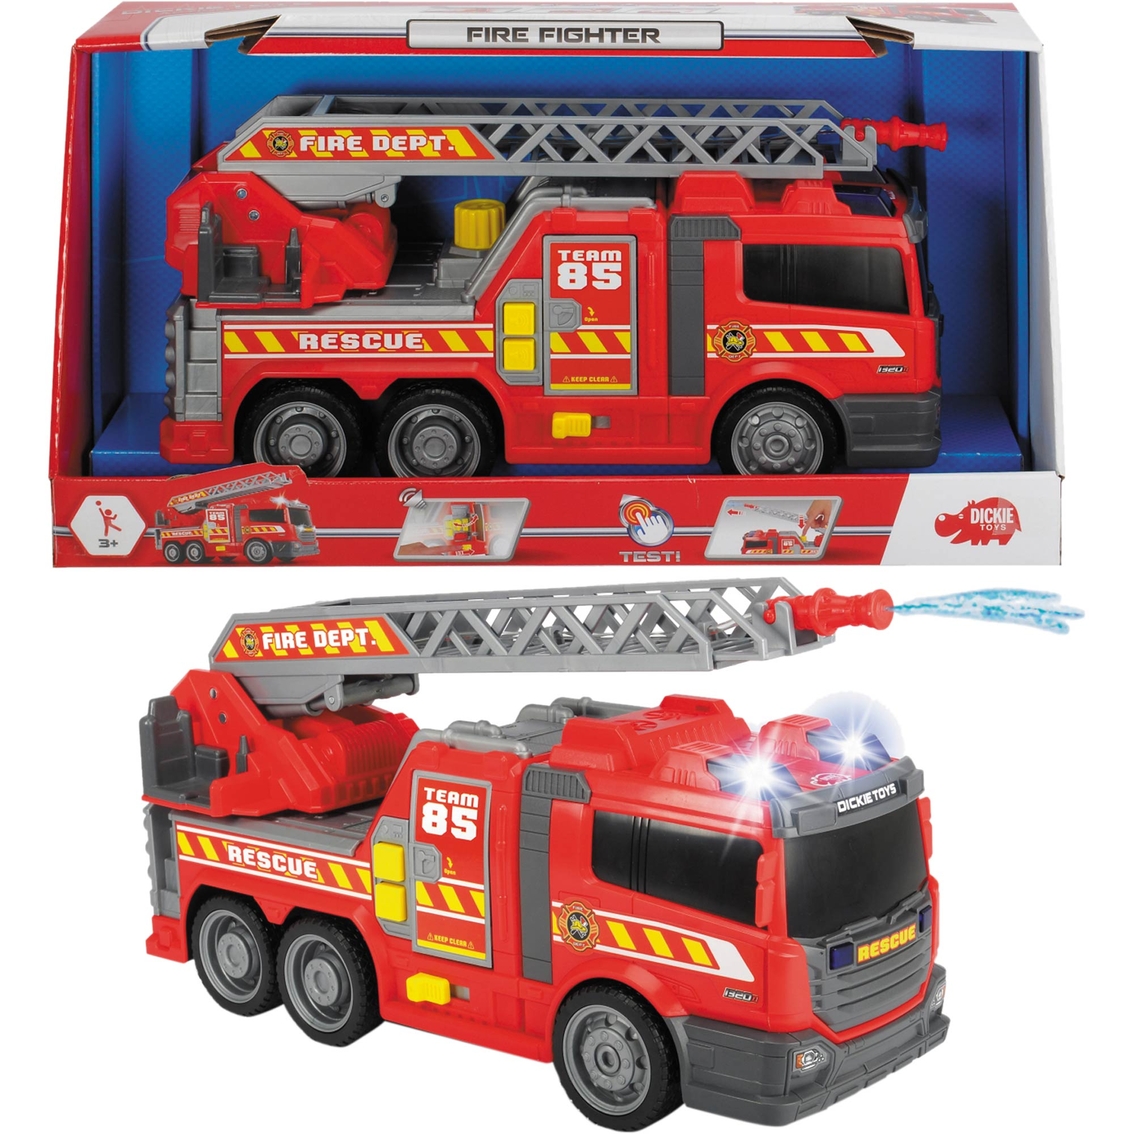 Dickie Toys Large Action Fire Fighter Vehicle - Image 2 of 4